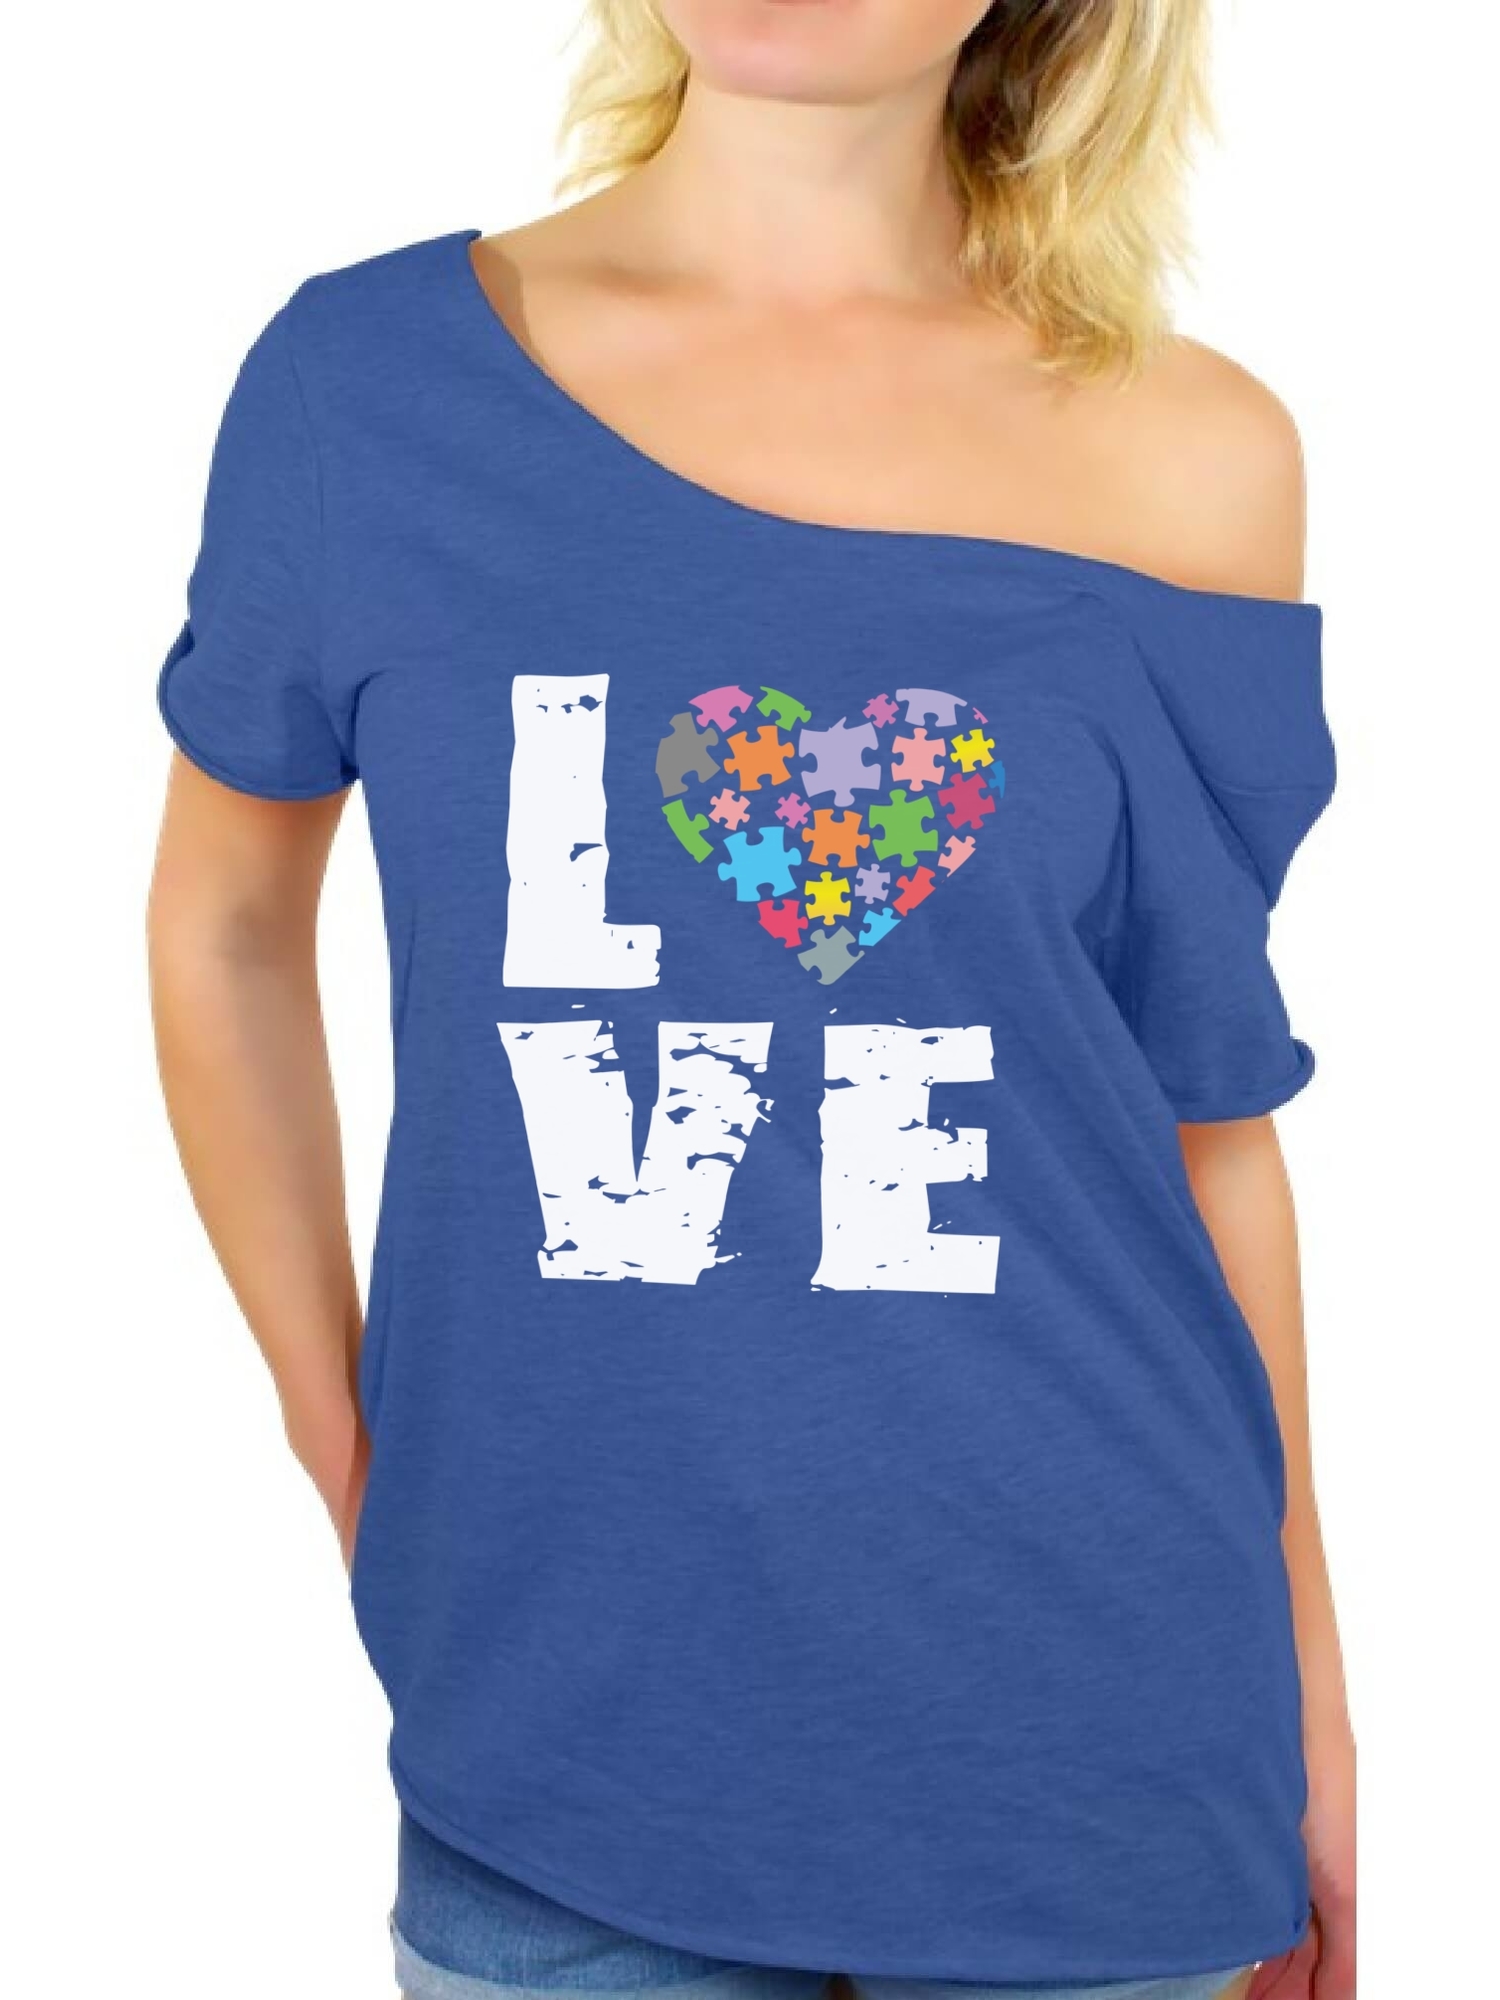 Awkward Styles Women's Love Puzzles Autism Awareness Graphic Off Shoulder Tops T-shirt Autistic Support - image 1 of 4